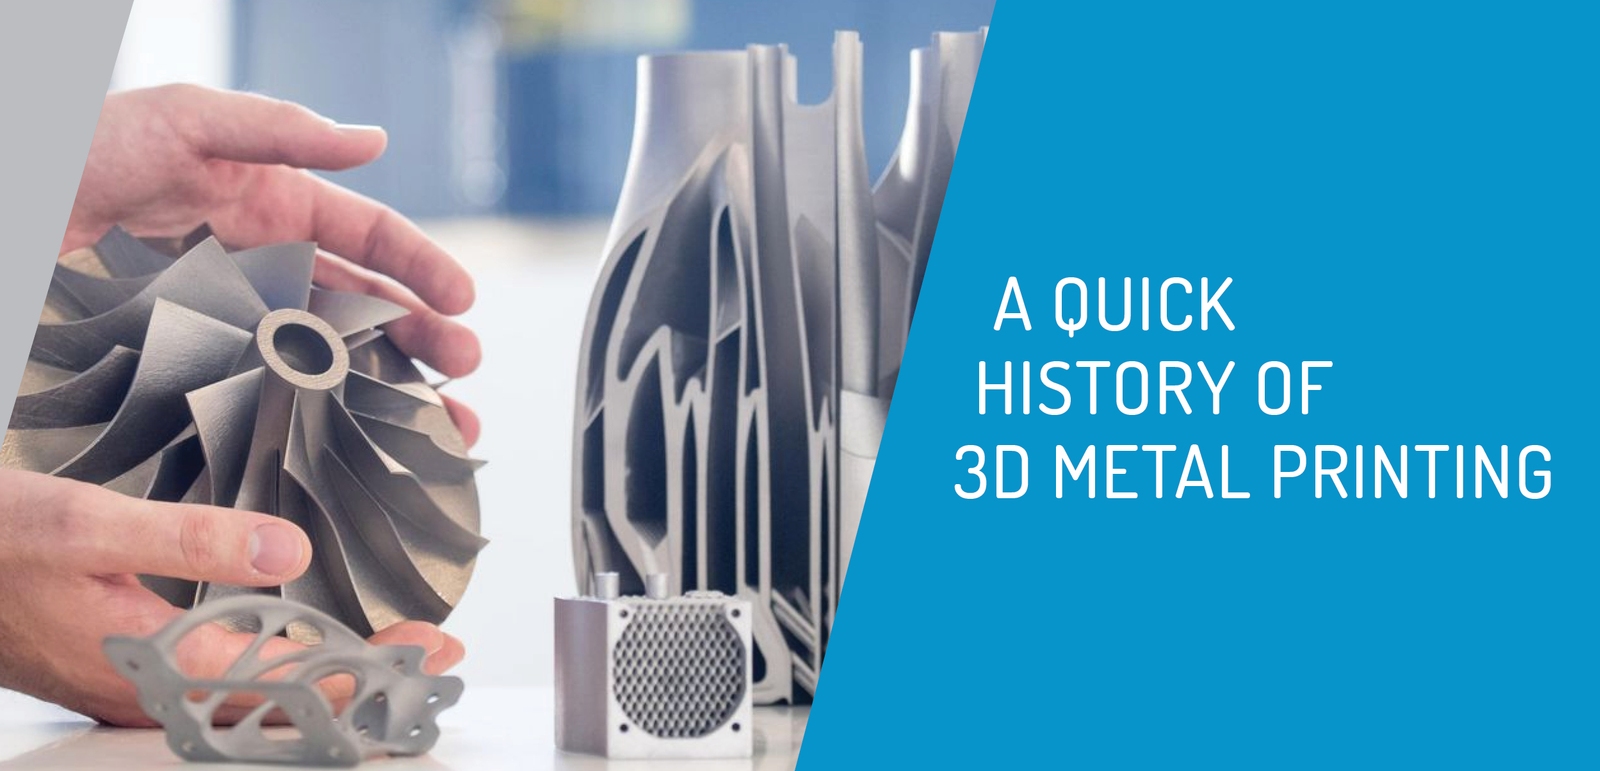 A Quick History of 3D Printing